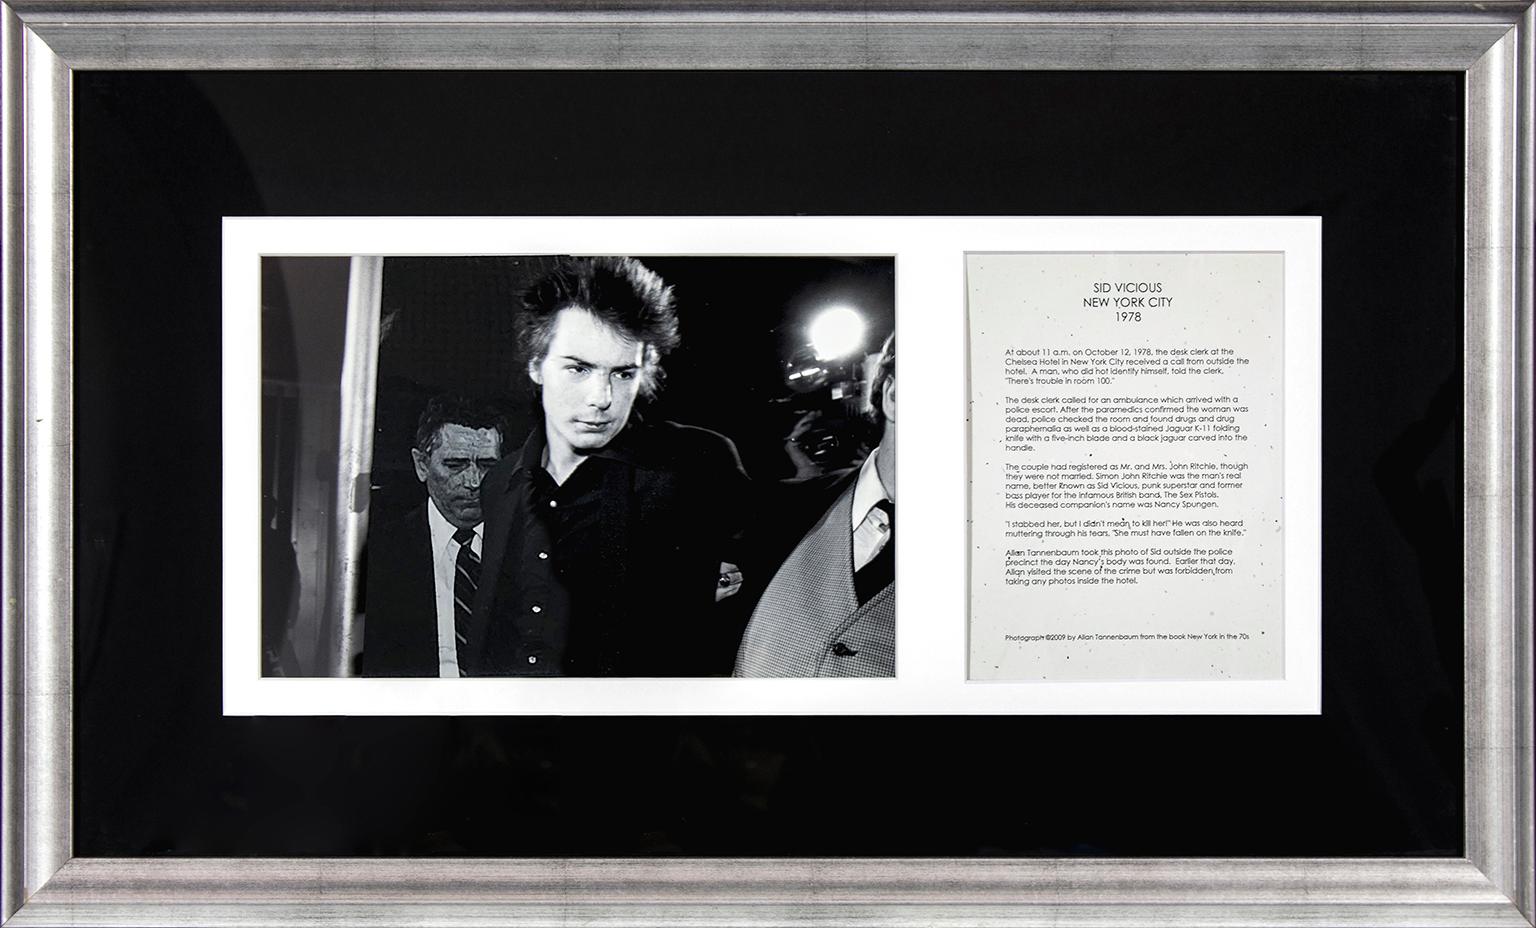 "Sid Vicious Arrest" black and white photograph by Allan Tannenbaum. Image size: 9 x 13 inches. The text to the right of the photo reads: "Sid Vicious New York City 1978. At about 11 a.m. on October 12, 1978, the desk clerk at the Chelsea Hotel in